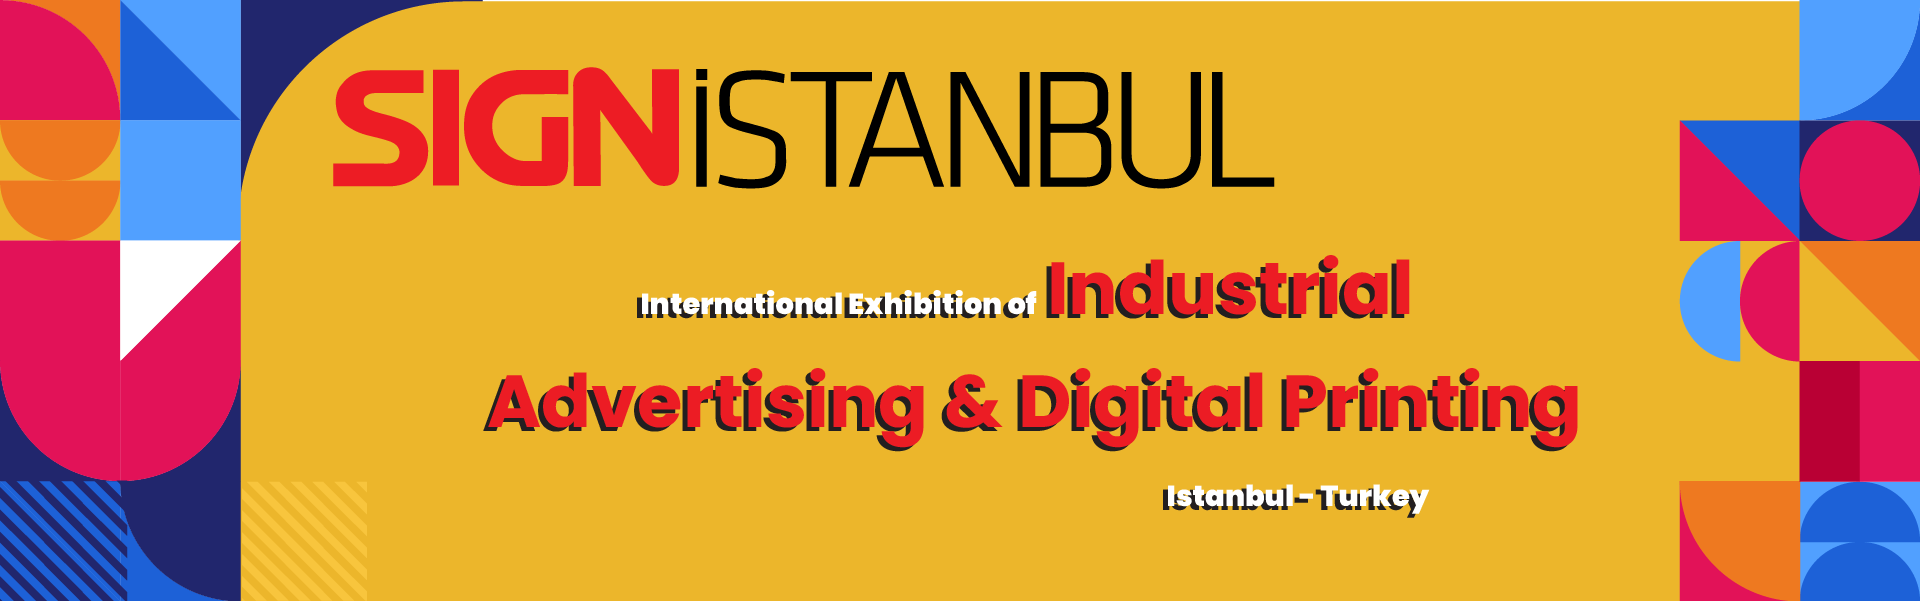 SIGN & Printing technology Exhibition Istanbul Turkey